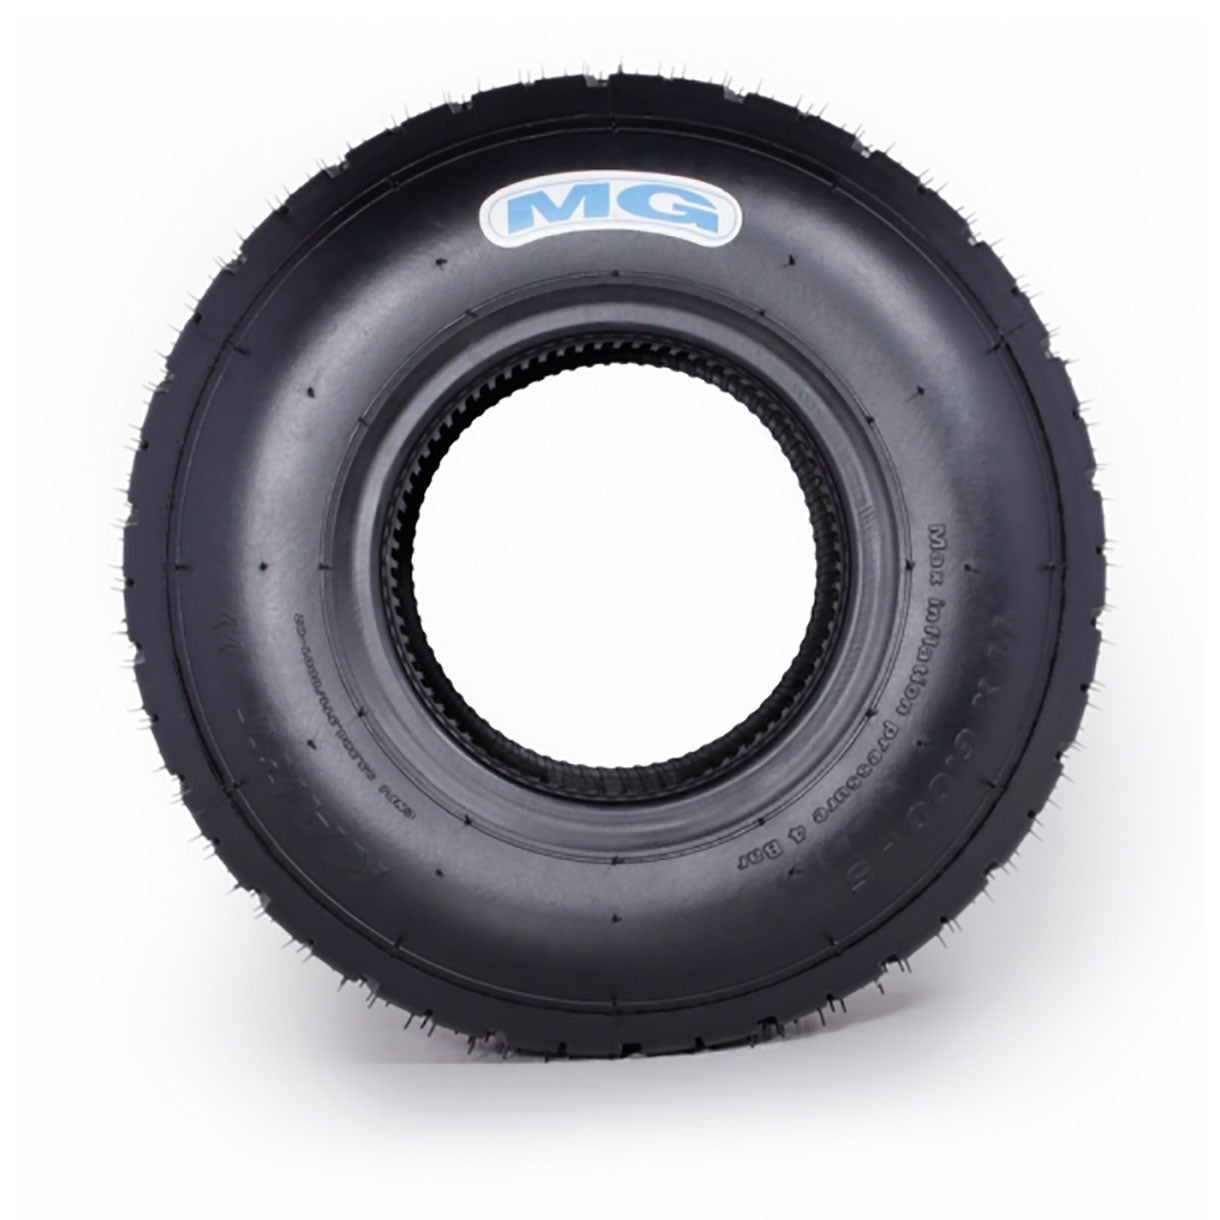 Dirt Tyres fo Go Kart Racing by MG Tires